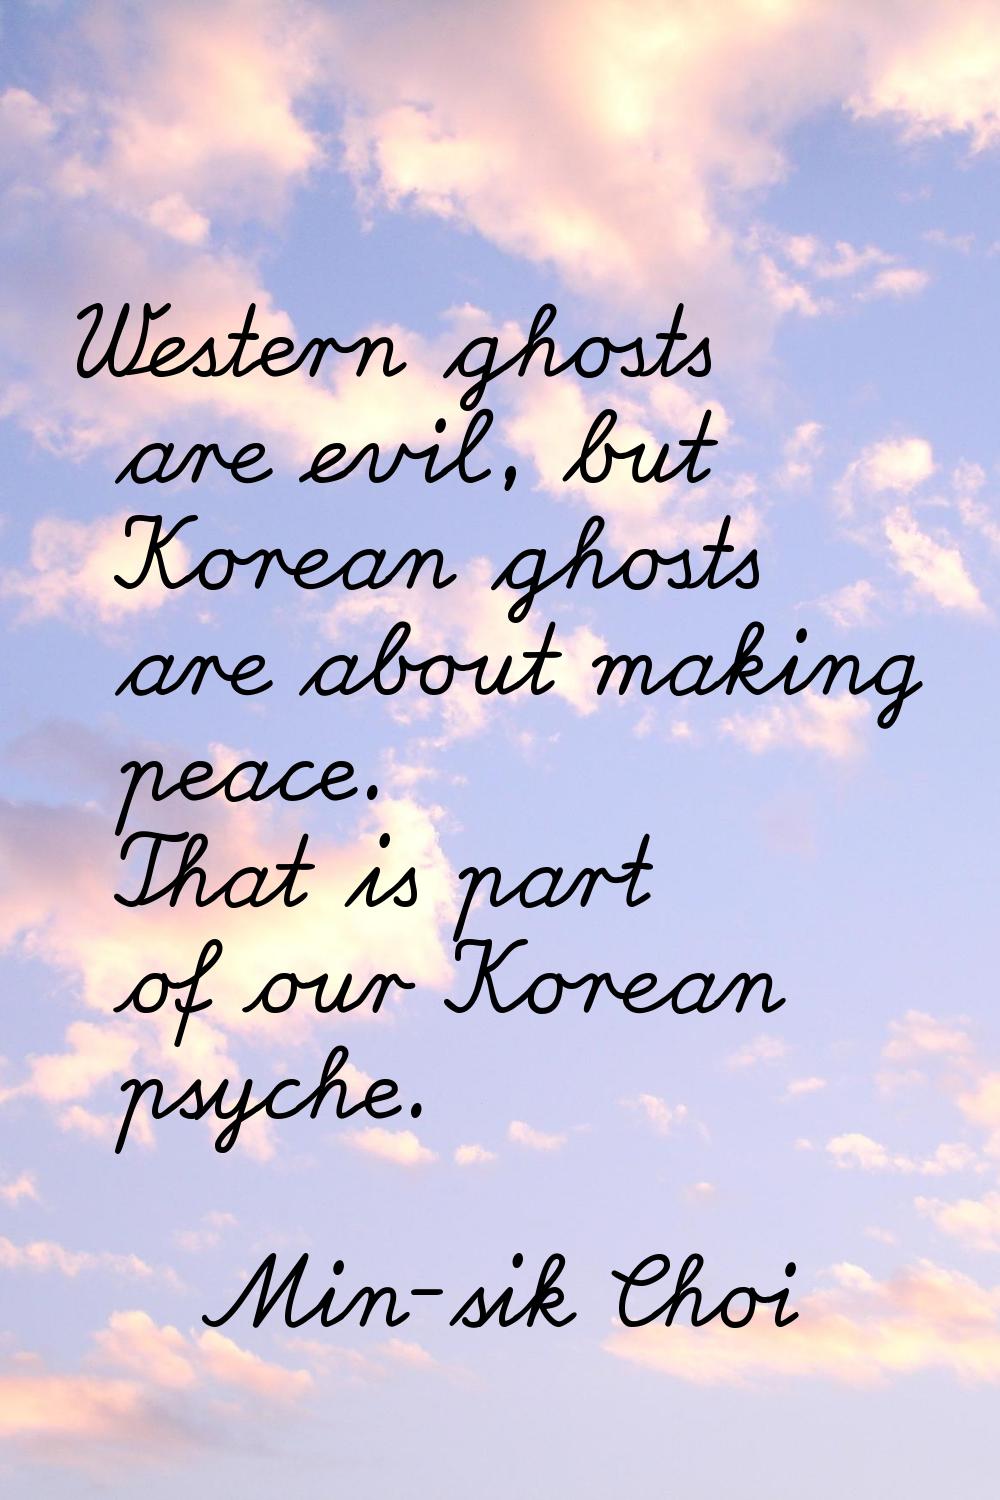 Western ghosts are evil, but Korean ghosts are about making peace. That is part of our Korean psych